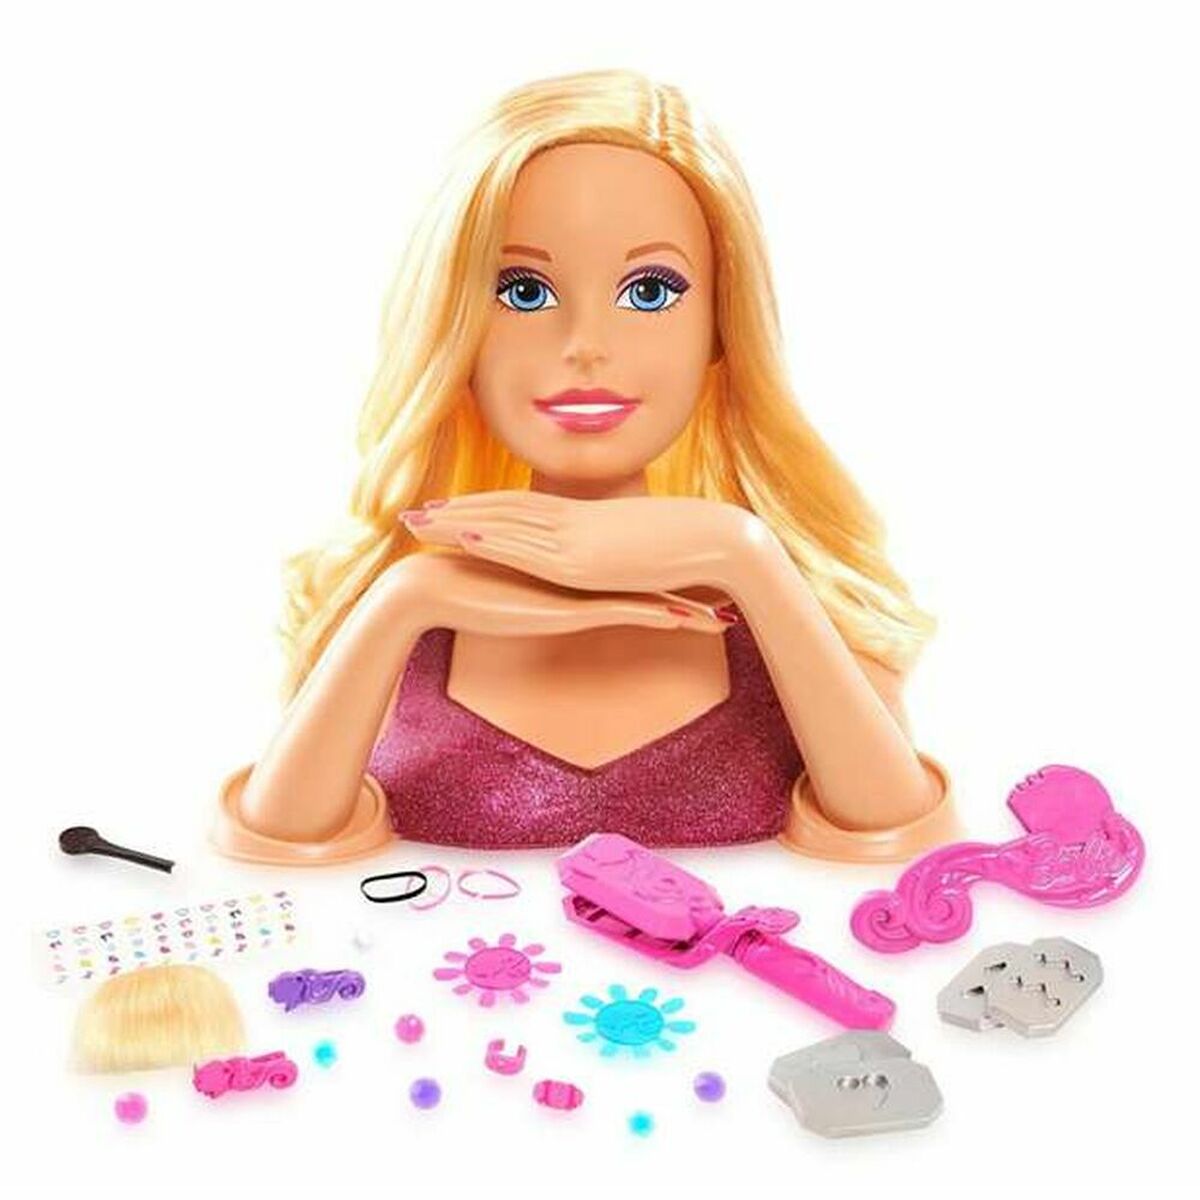 Figuur Barbie Styling Head with Accessory